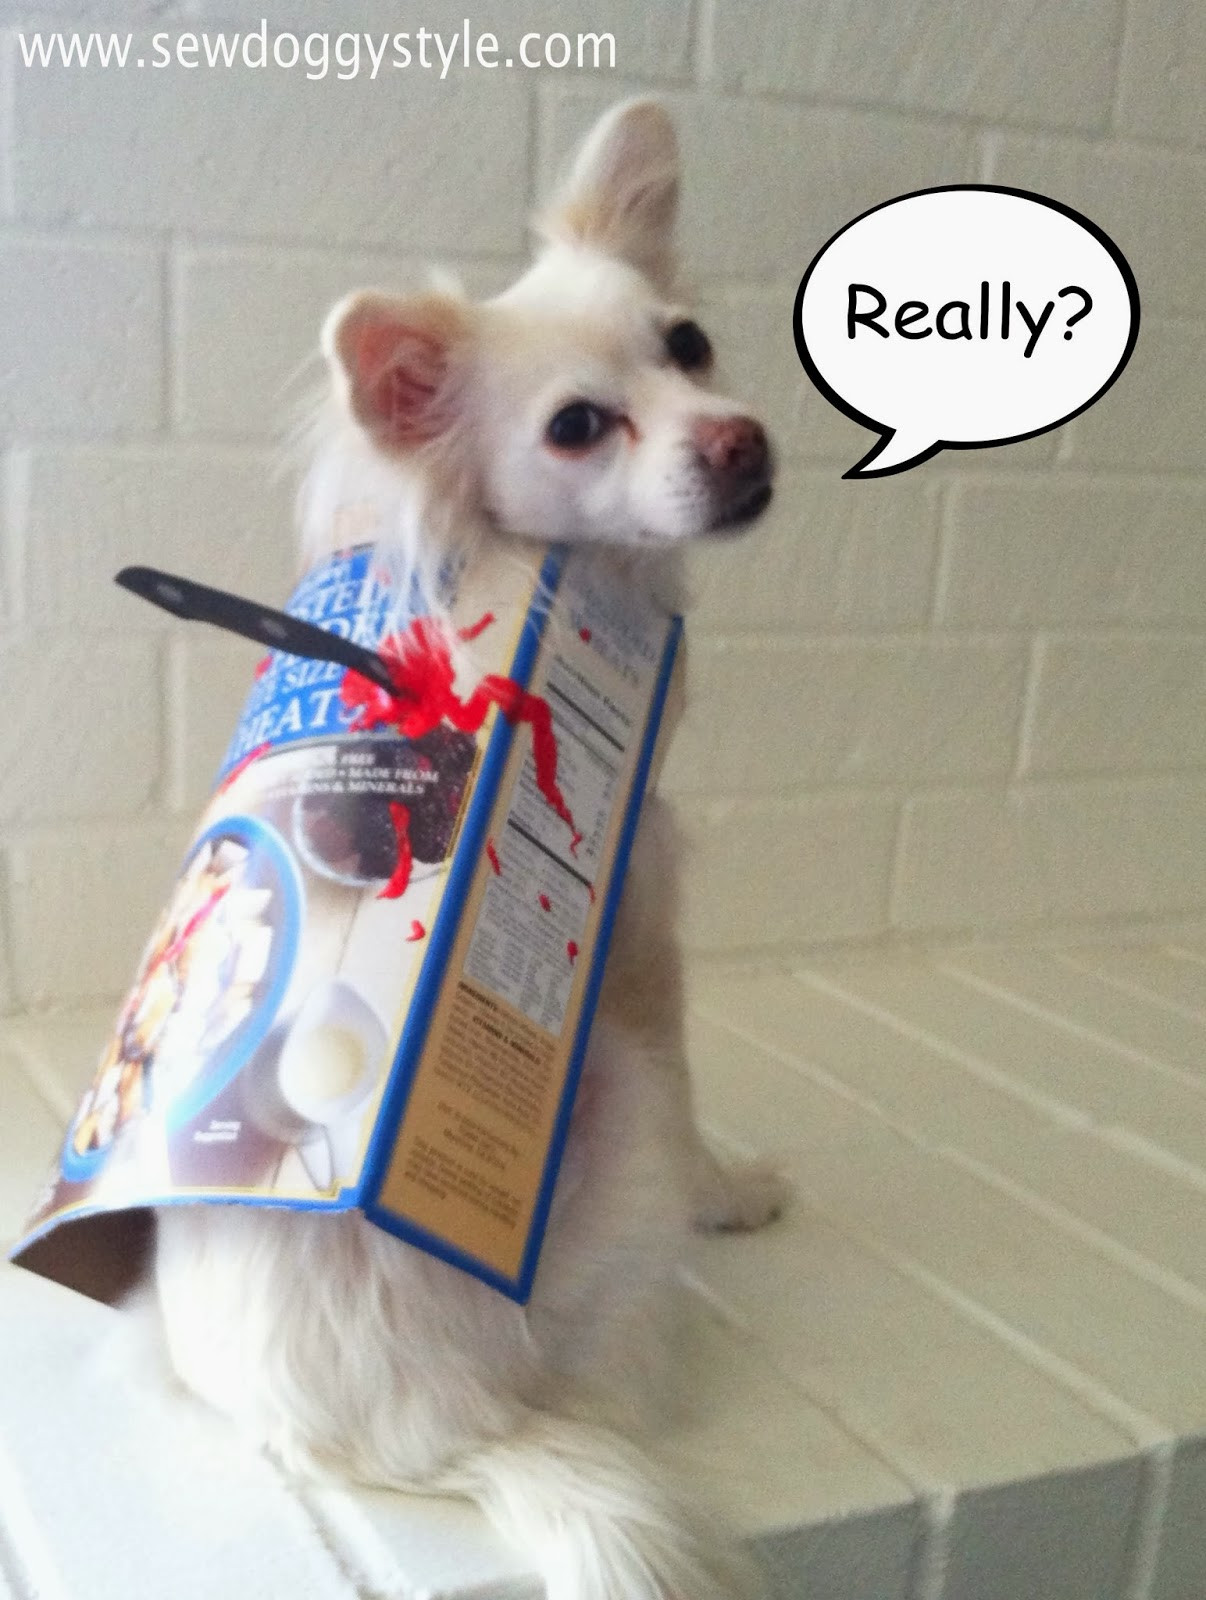 DIY Halloween Costume For Dogs
 Sew DoggyStyle Last Minute DIY Halloween Costume Cereal